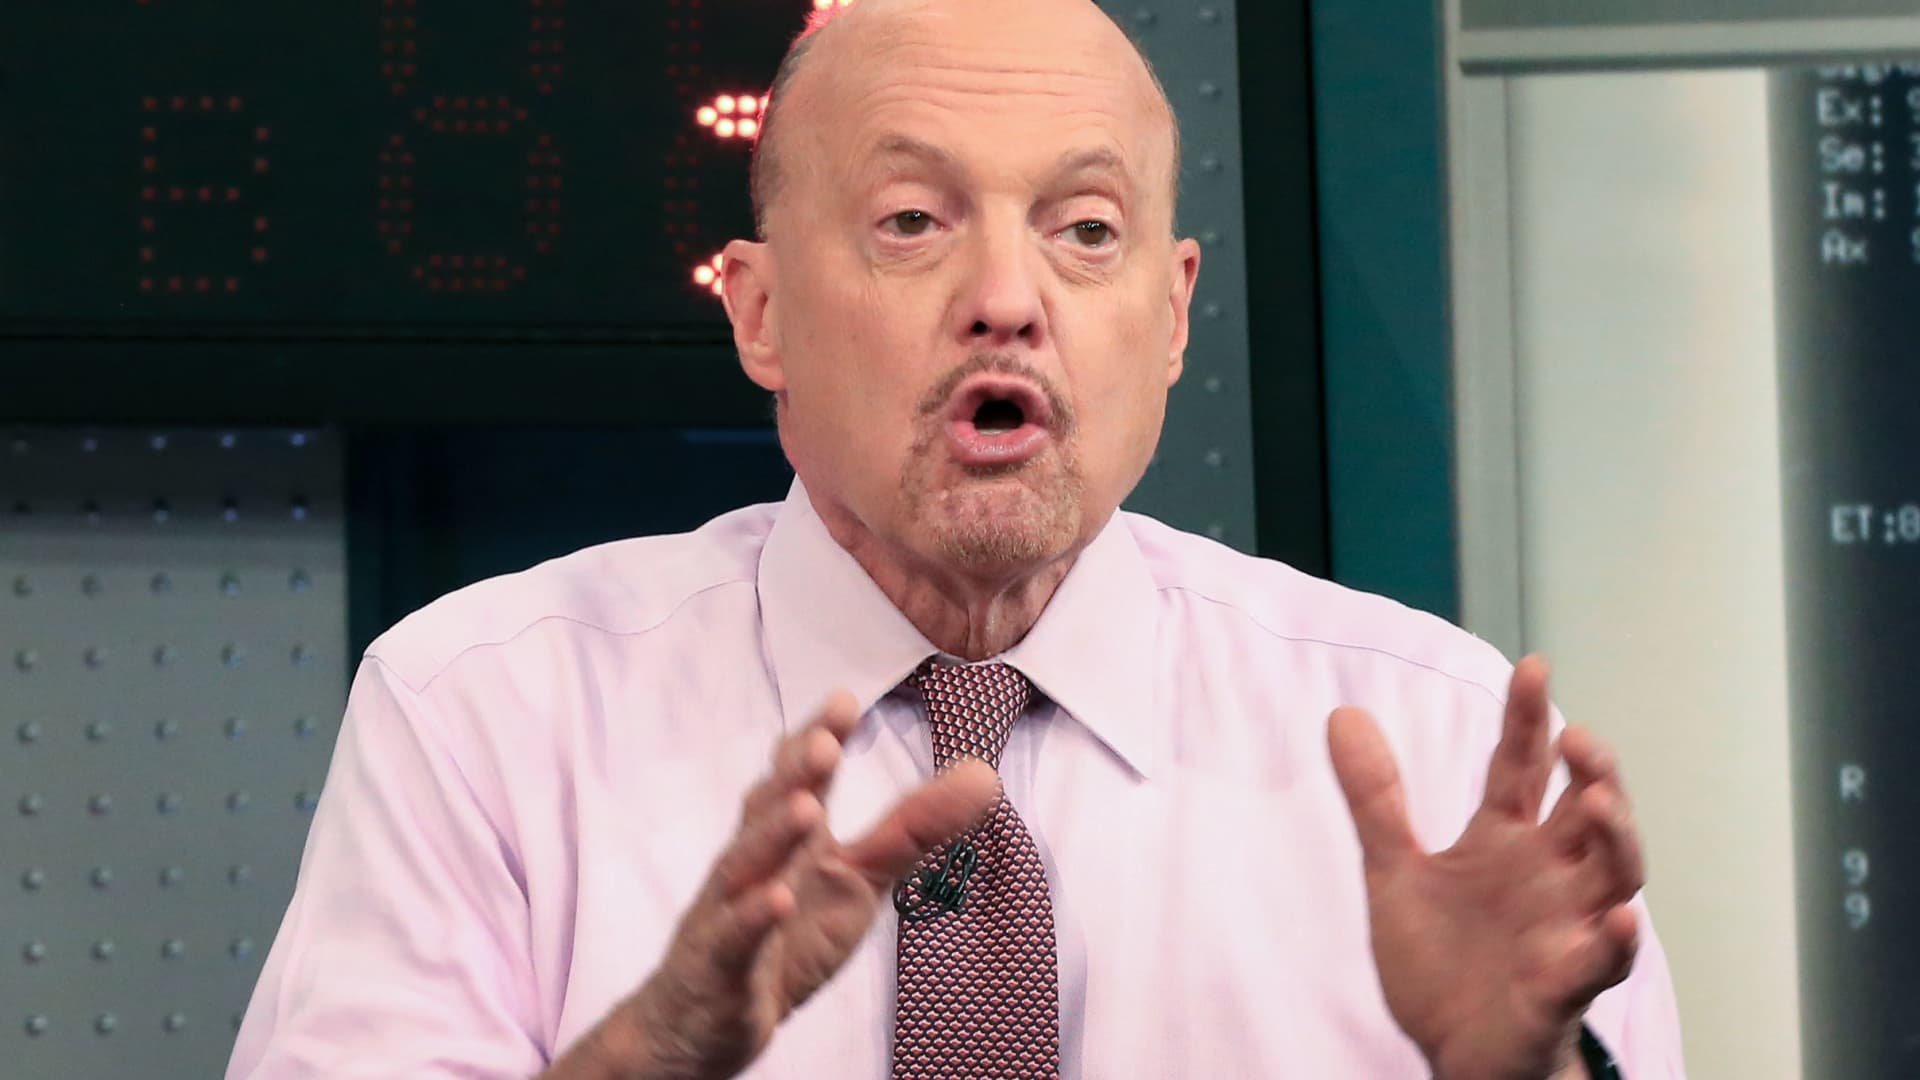 Don’t bet against short sellers in this market, Jim Cramer warns